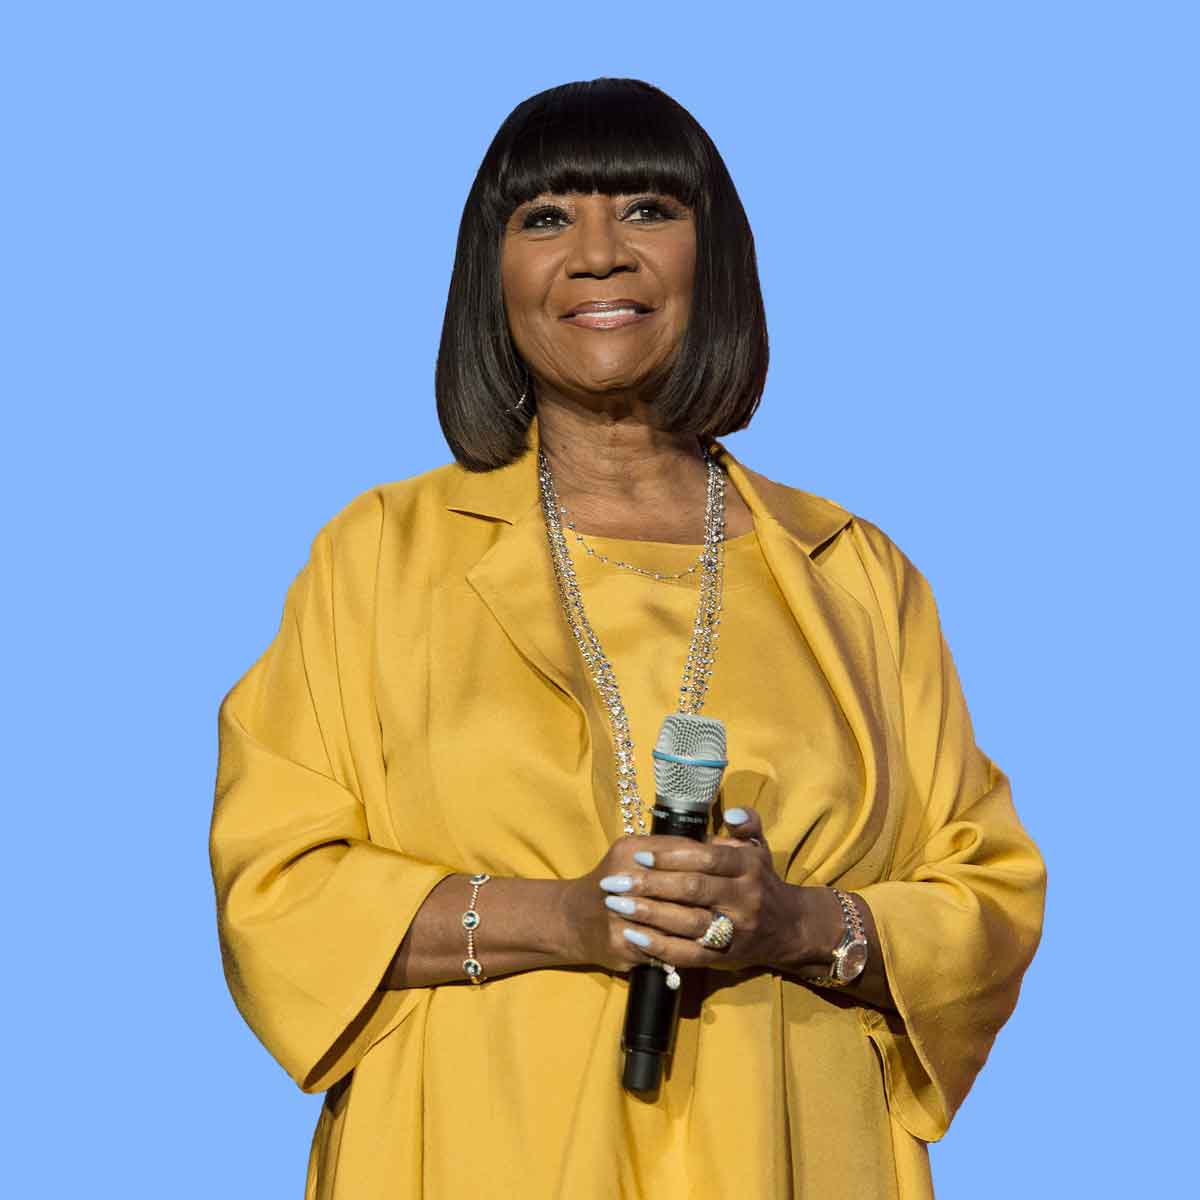 Patti LaBelle Shares The Recipe For Her Internet-Famous Sweet Potato Pie